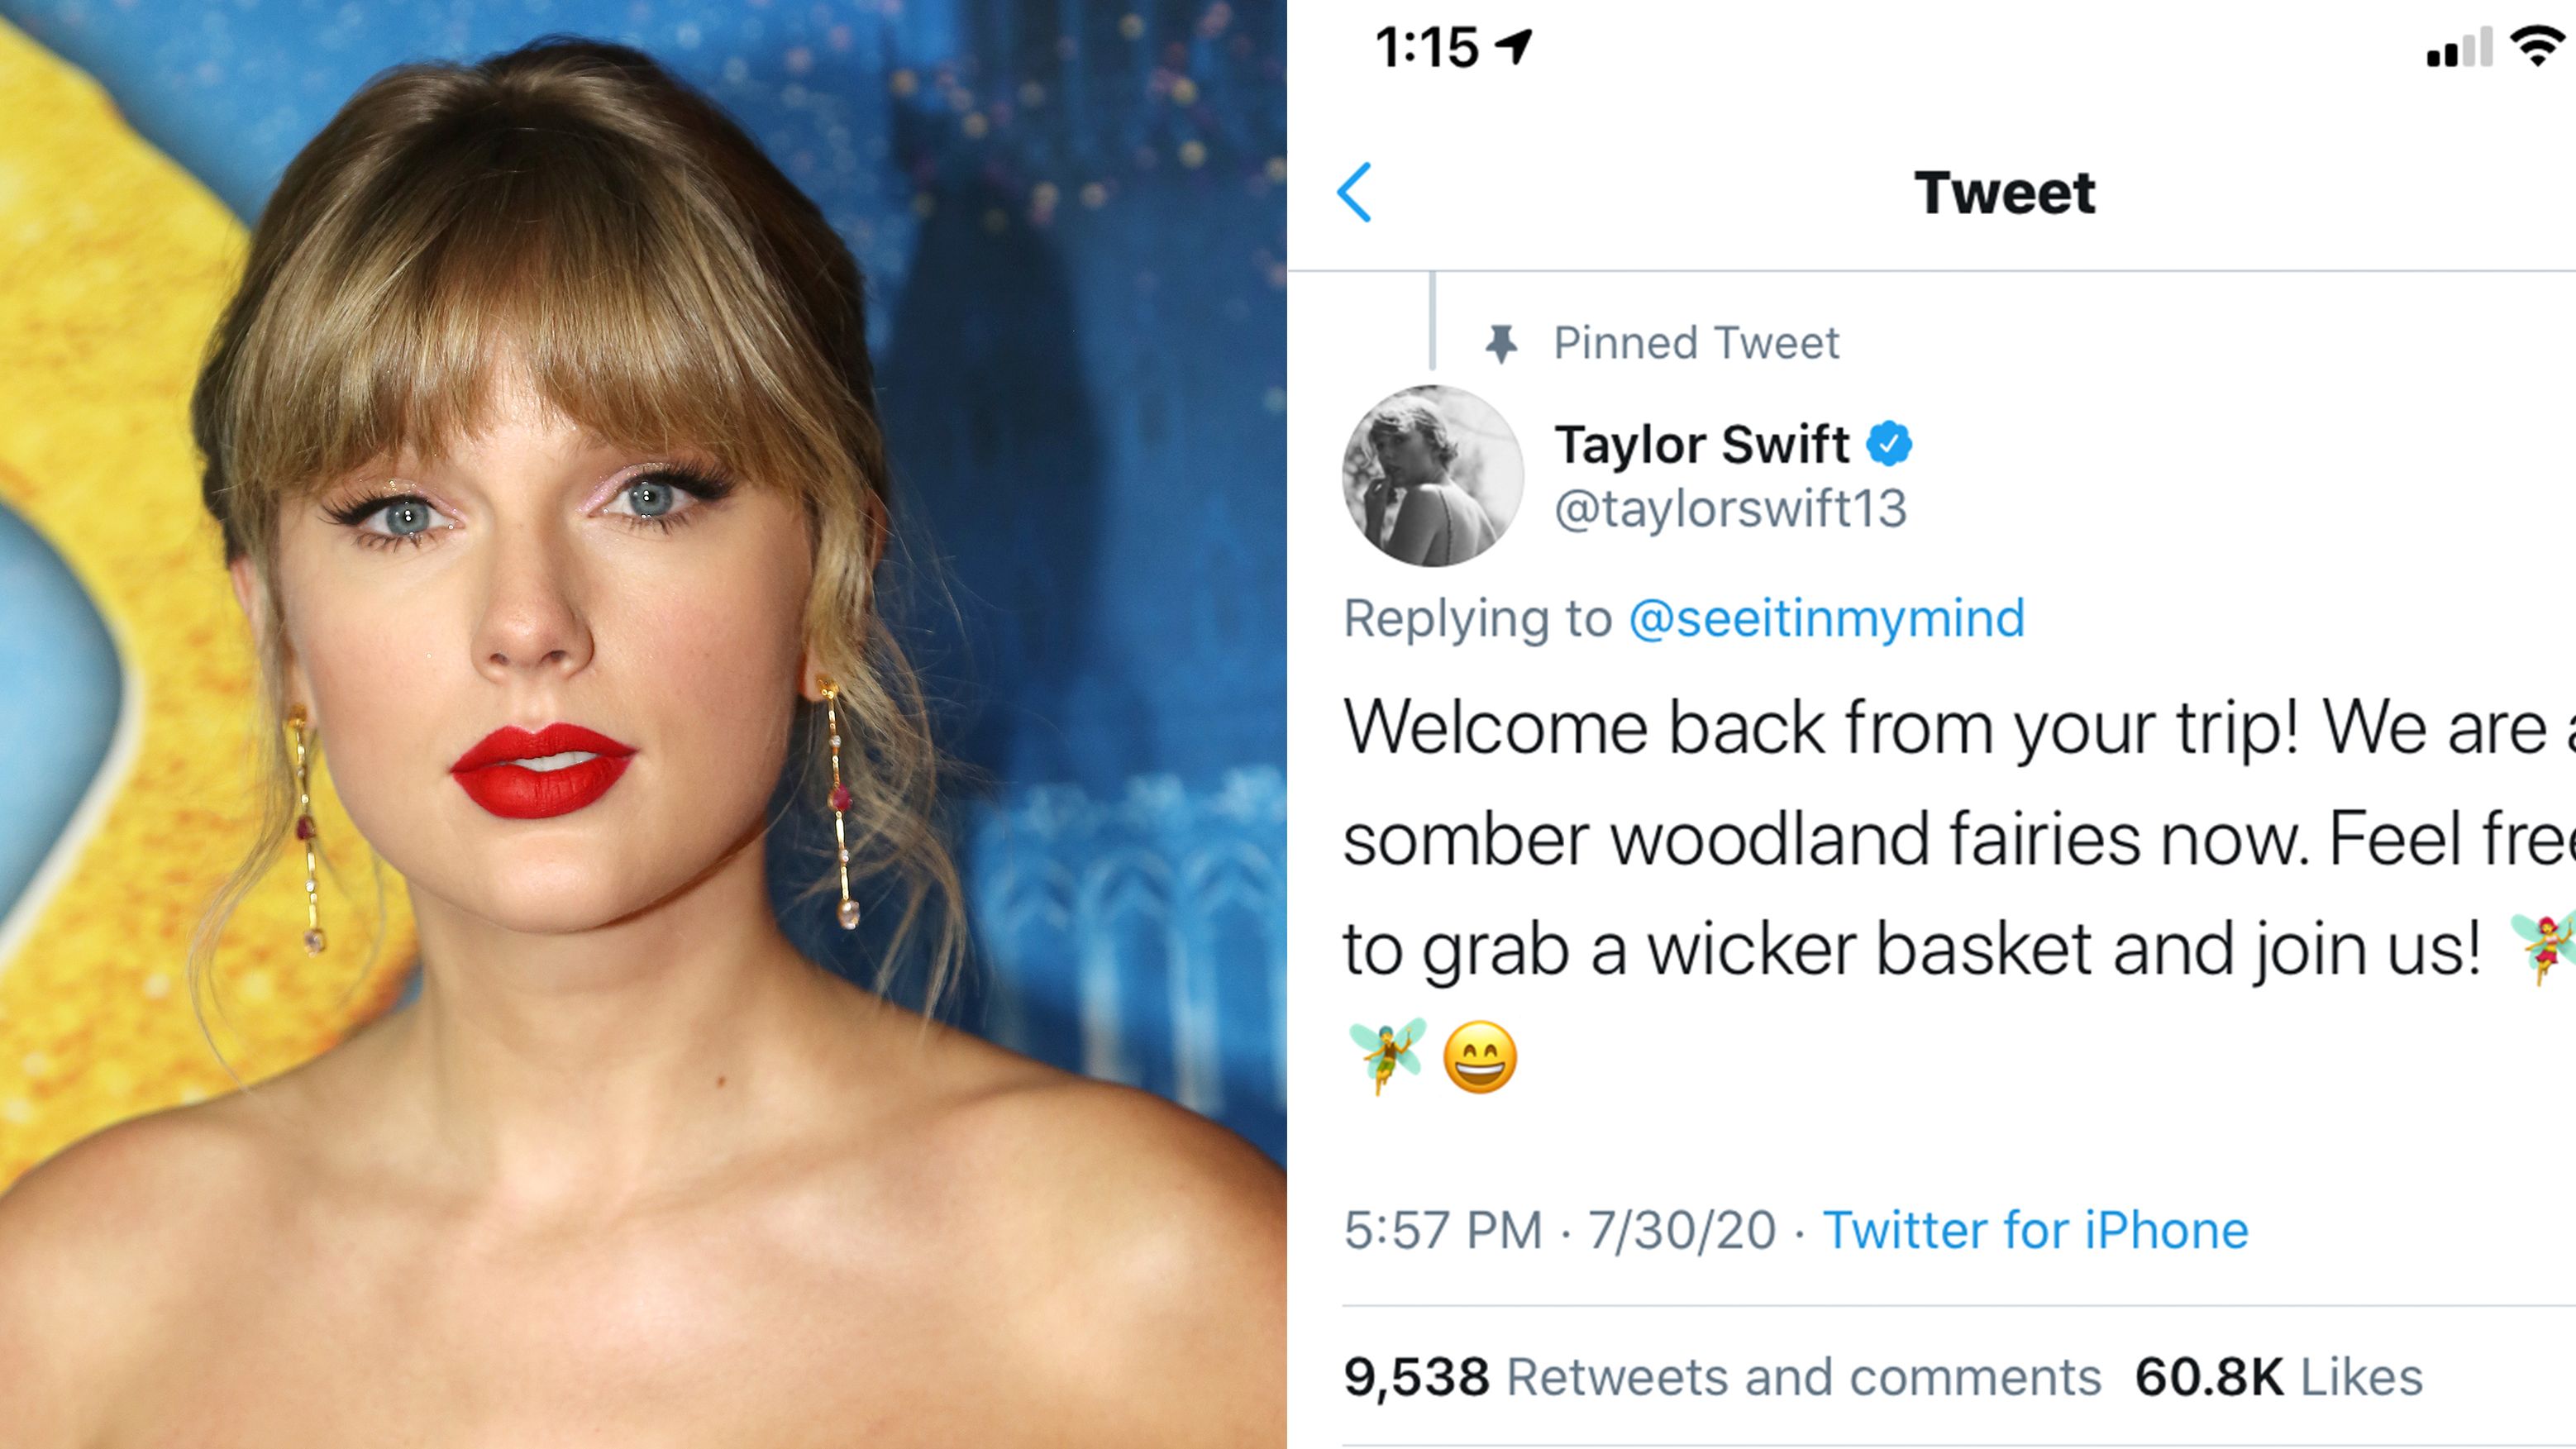 UPDATED] Taylor Swift Responded to the Girl Who Missed the Release